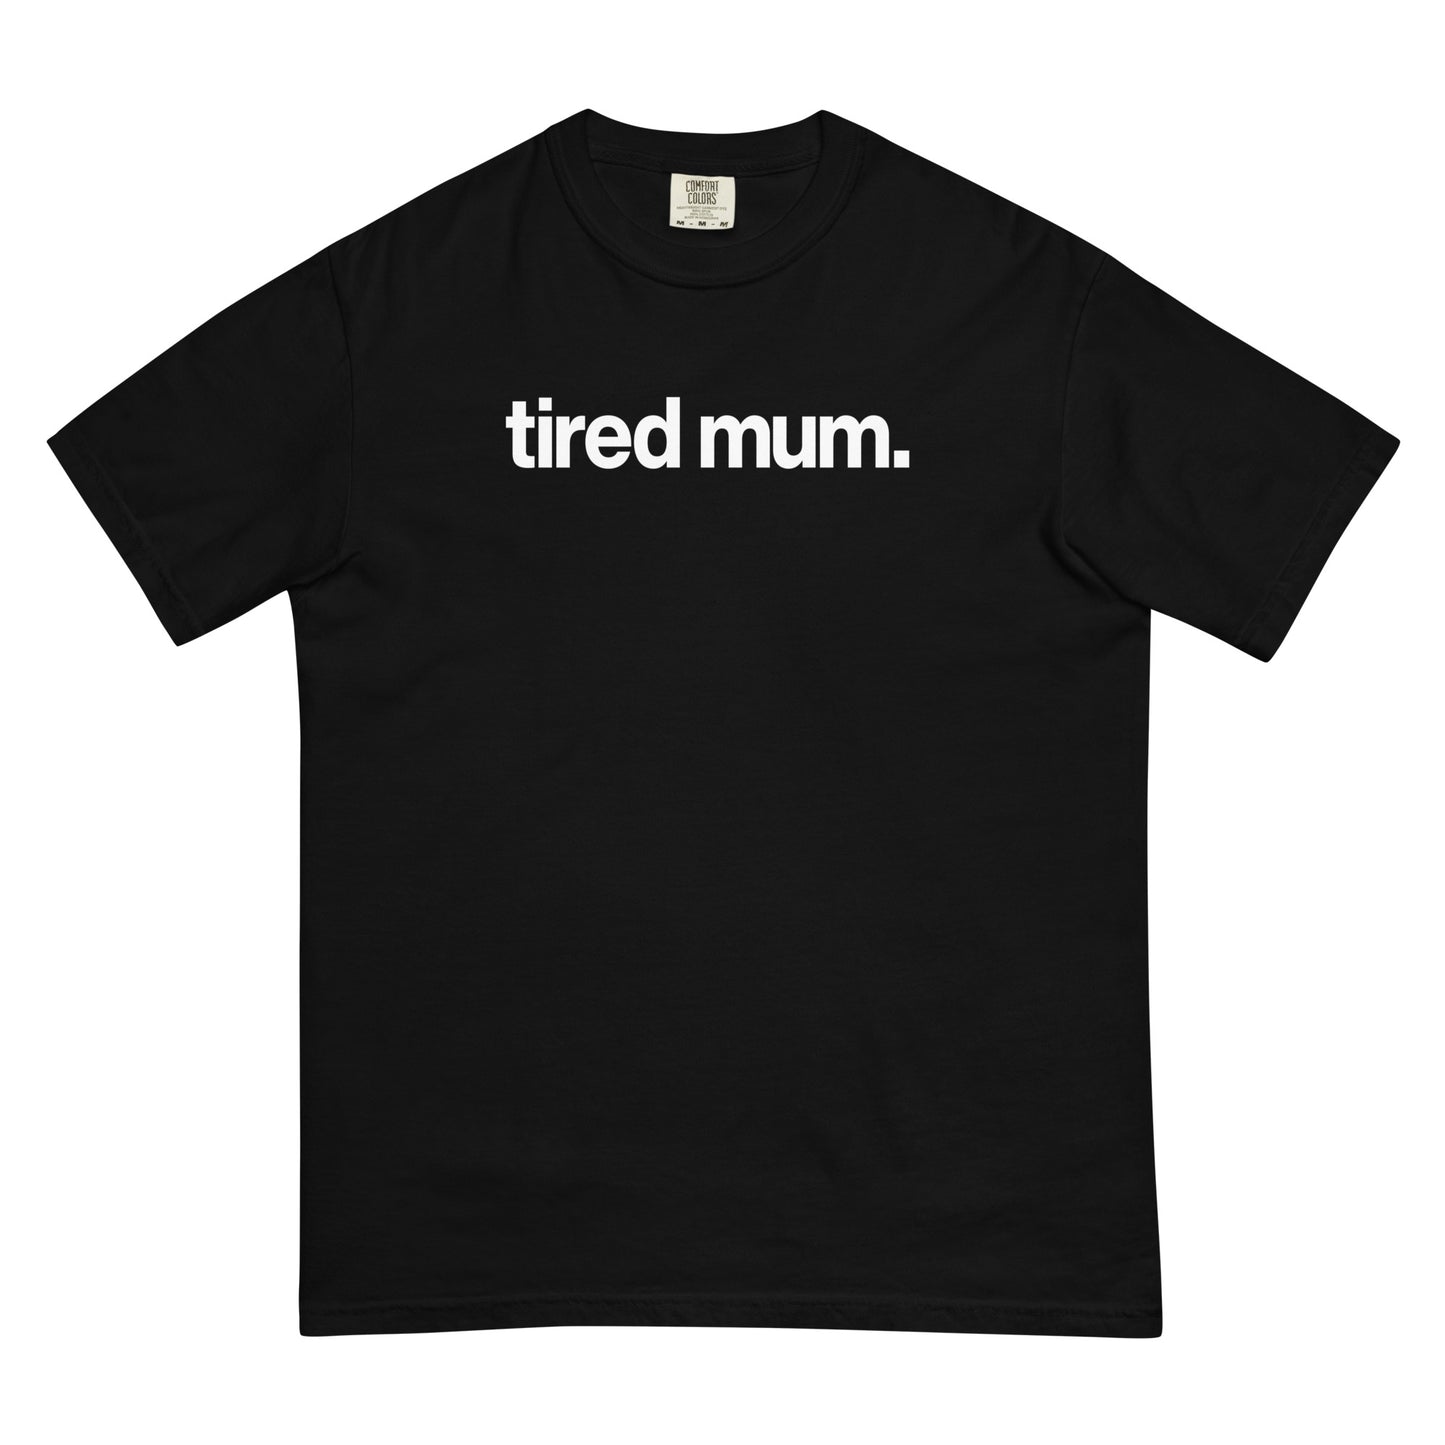 "tired mum" relaxed fit t-shirt